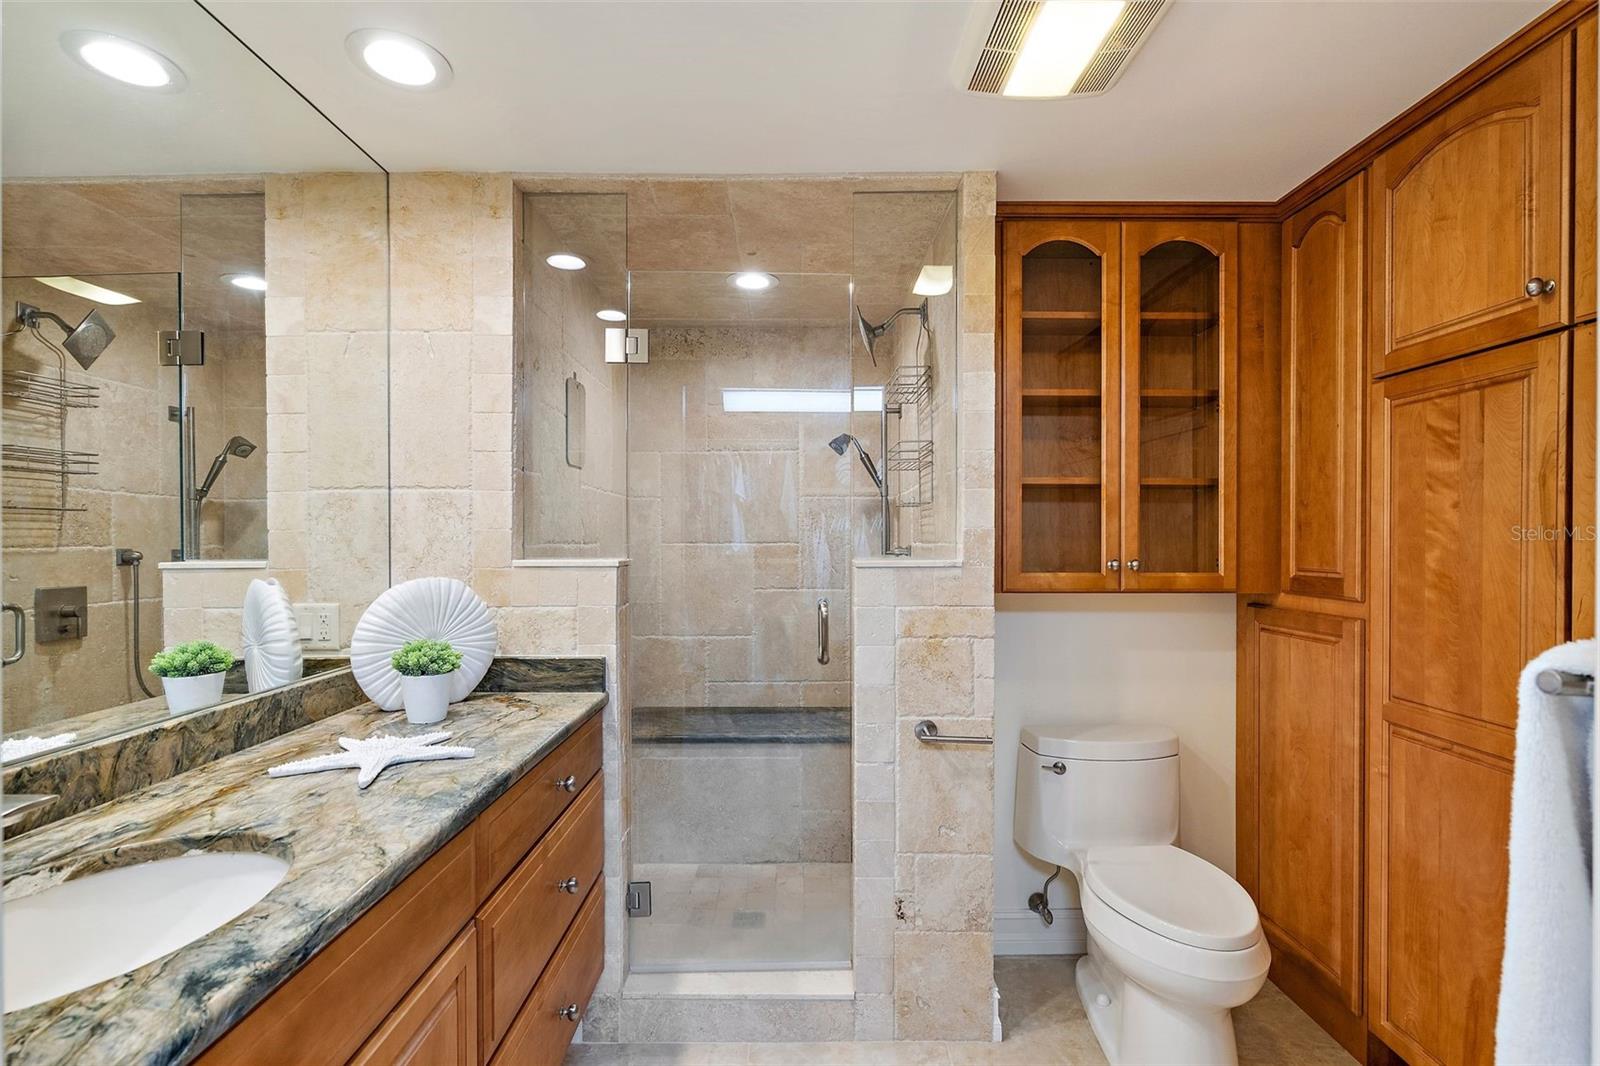 The Primary Bathroom measures a spacious 7' X 9'! The linen closet is another great feature. Every nook and cranny here is utilized! Hooray for the comfort-height toilet with superior flushing mechanism!